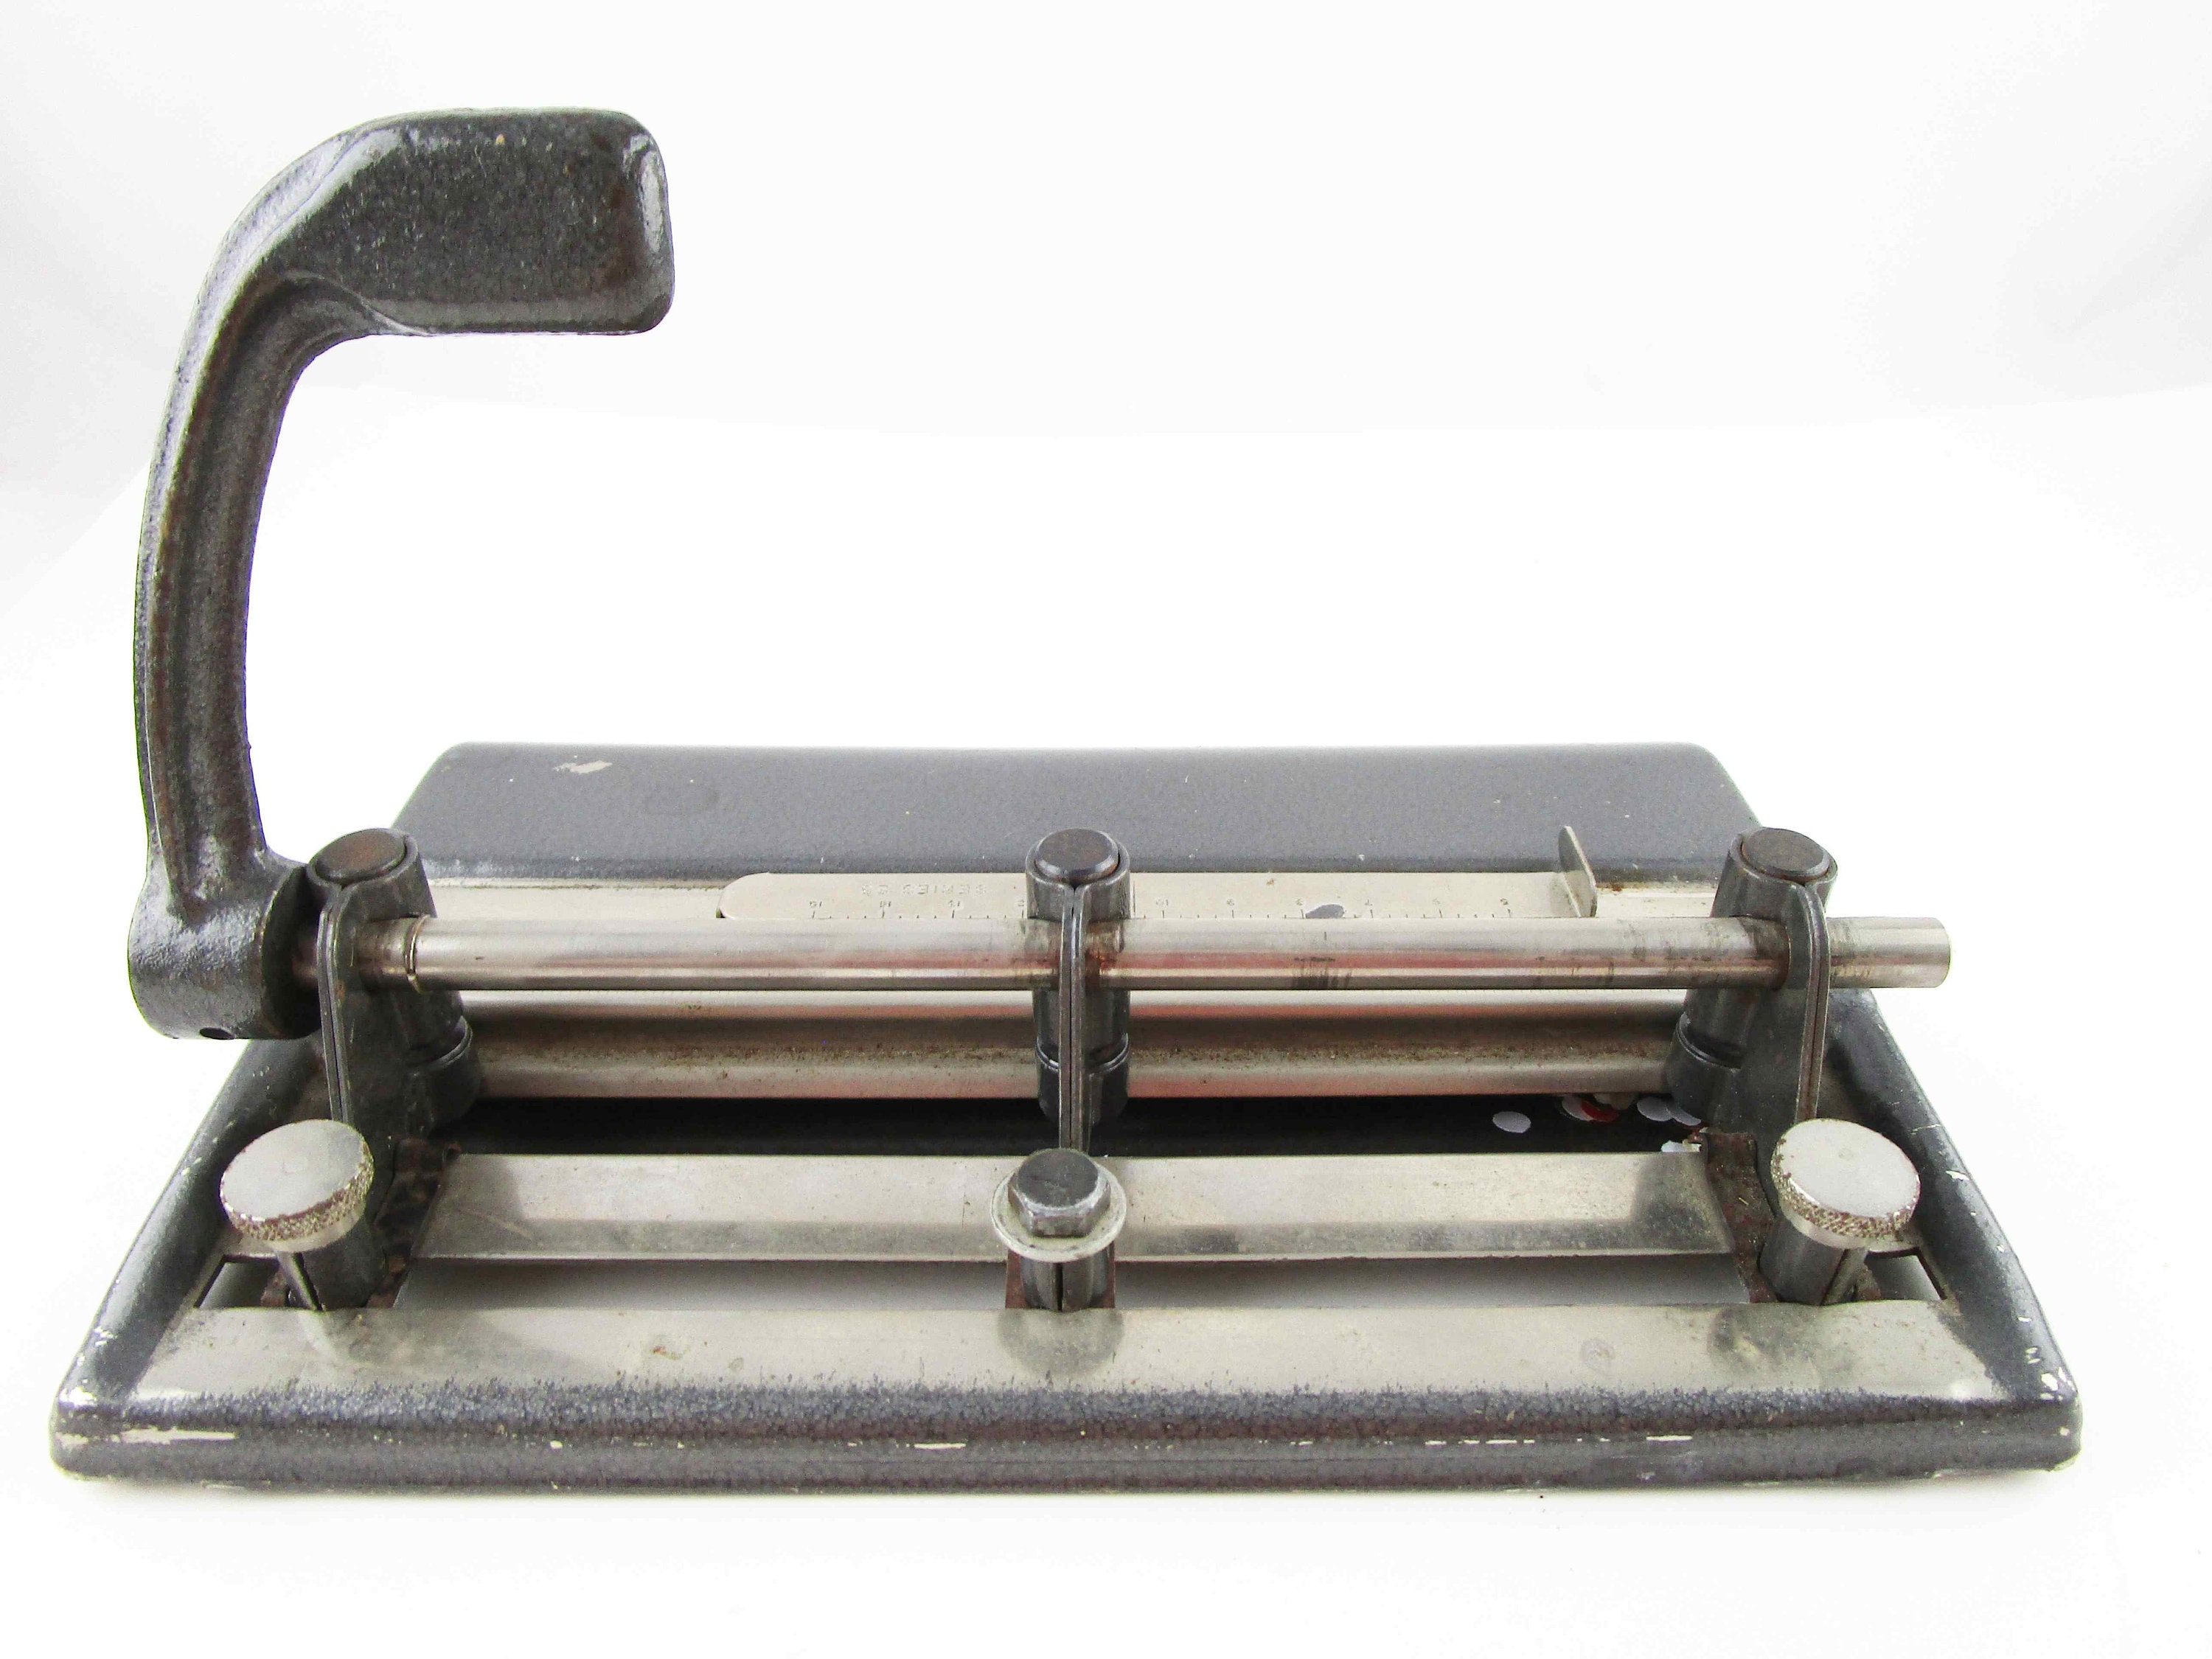 Hole puncher old school 3-hole punch heavy duty vintage - arts & crafts -  by owner - sale - craigslist